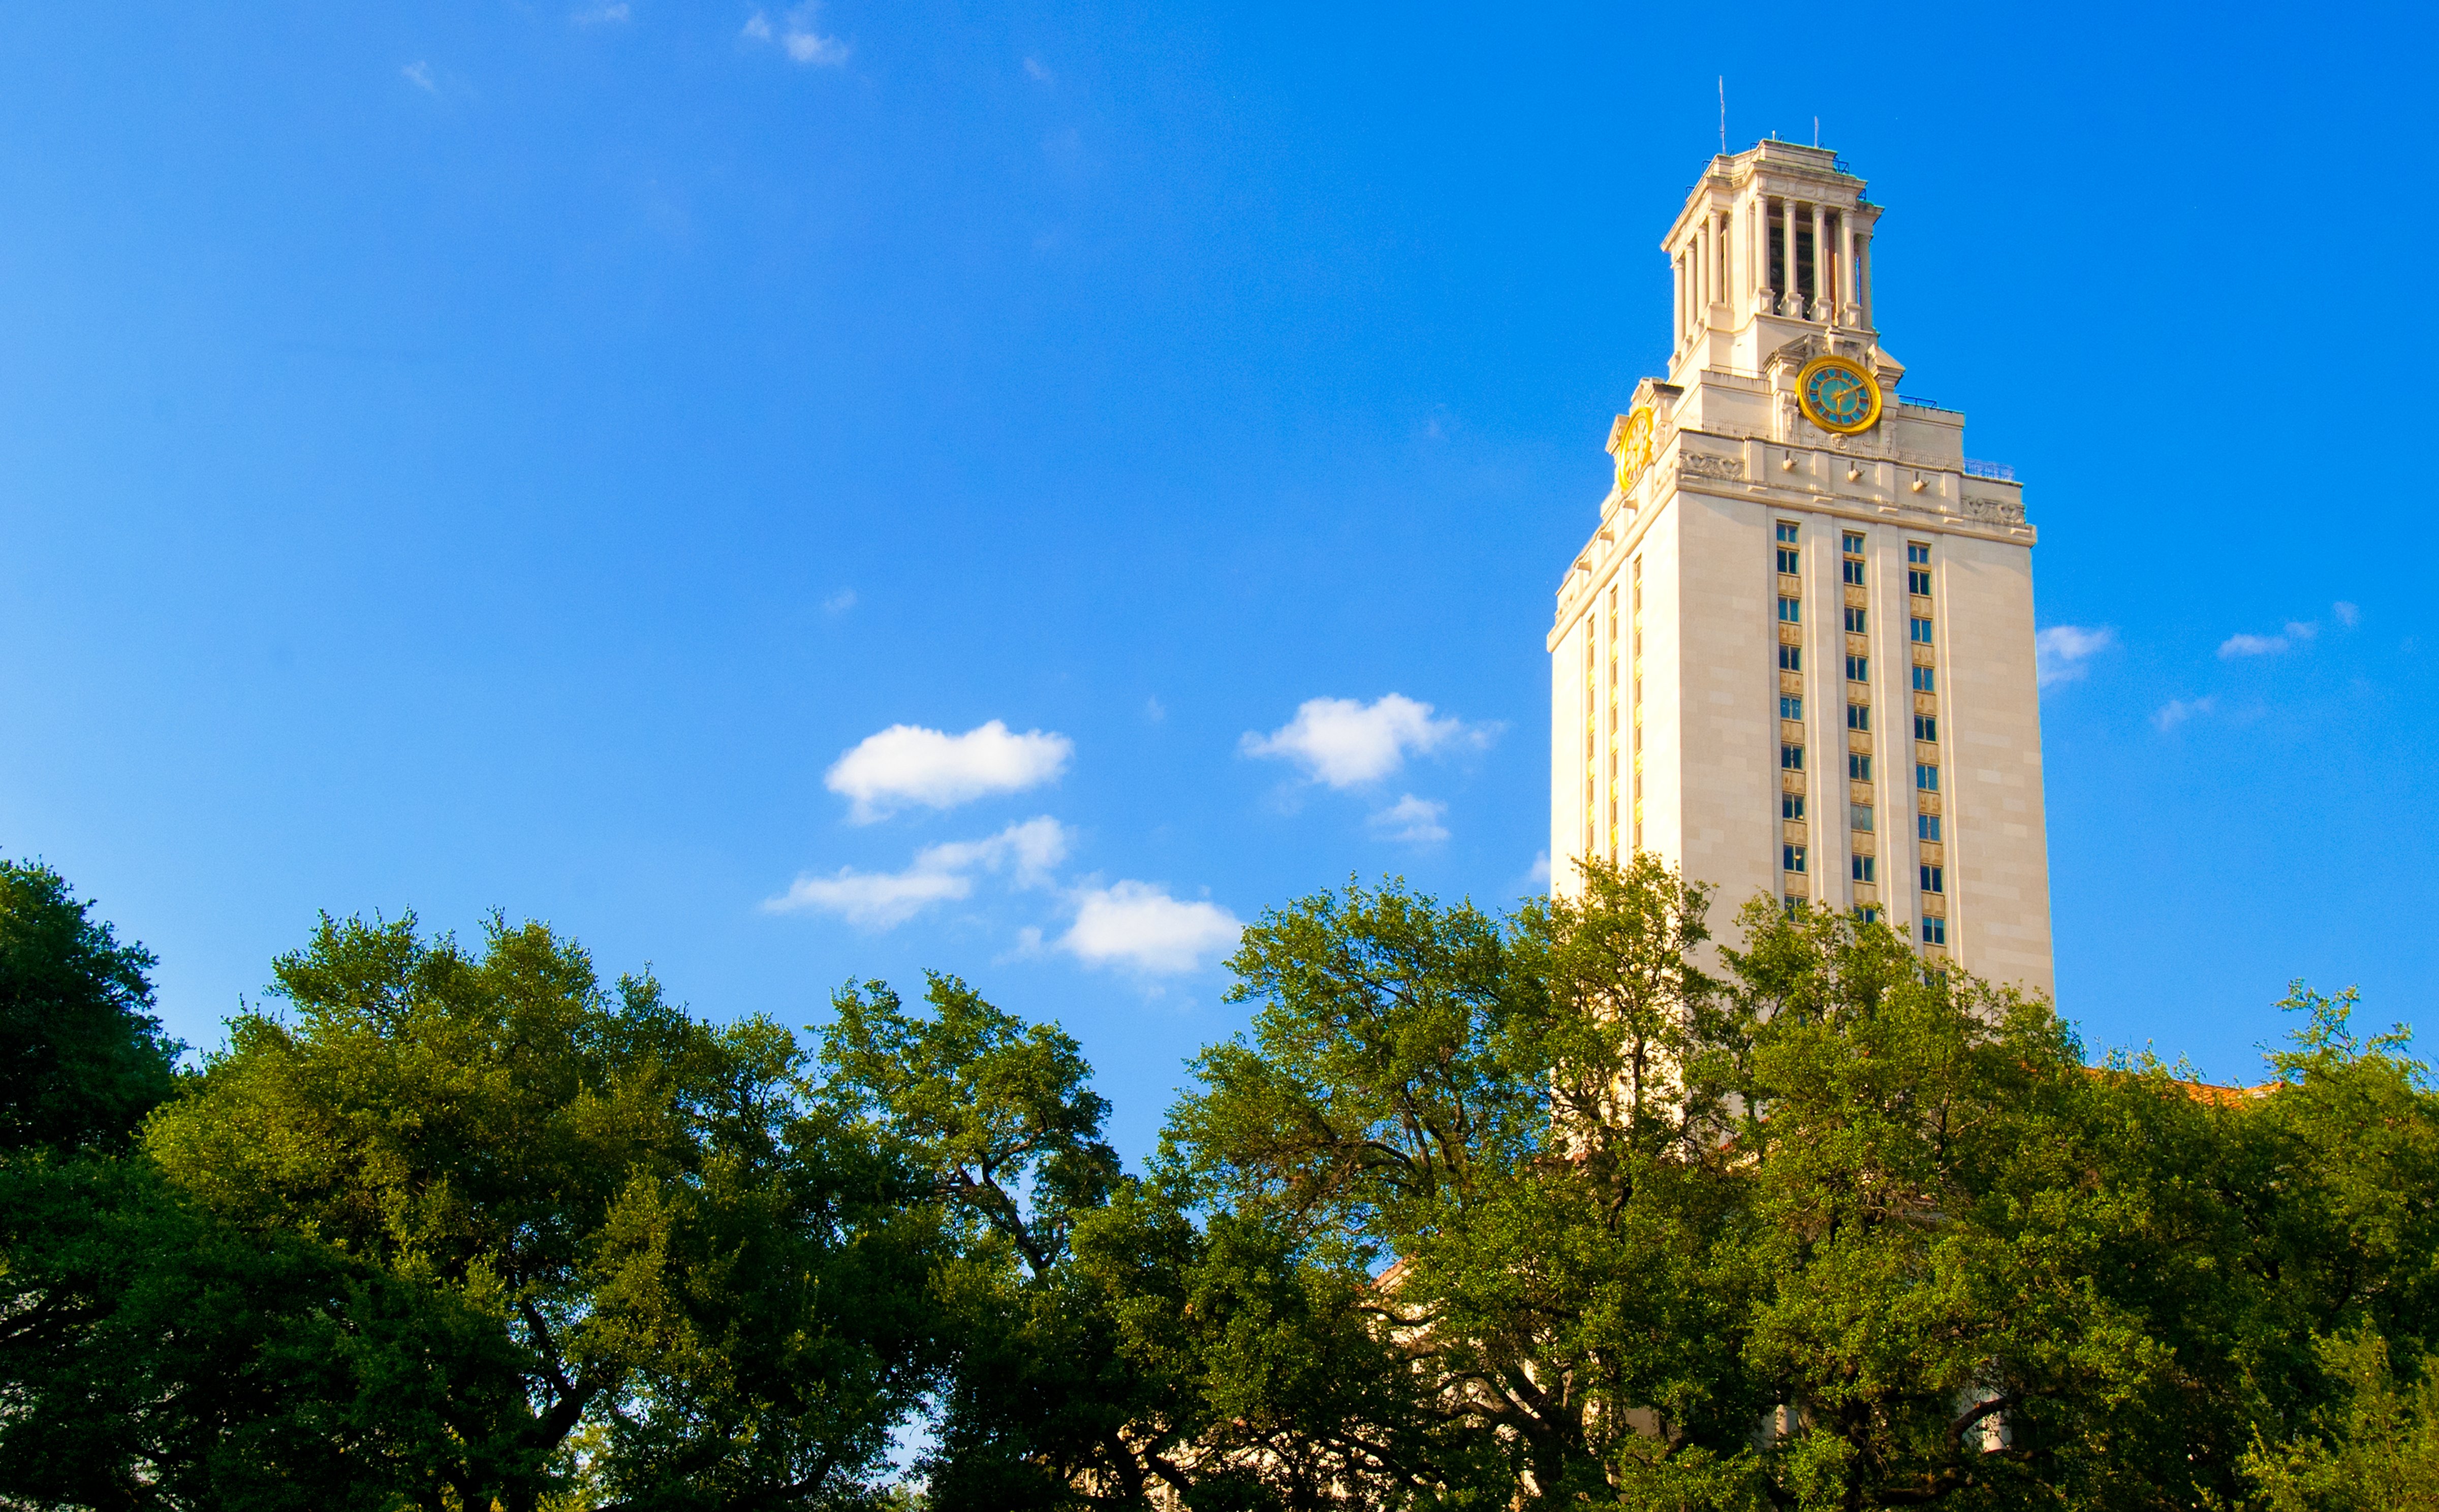 The University of Texas in Austin's historic Main Building's tower. (Don Klumpp&mdash;Getty Images)